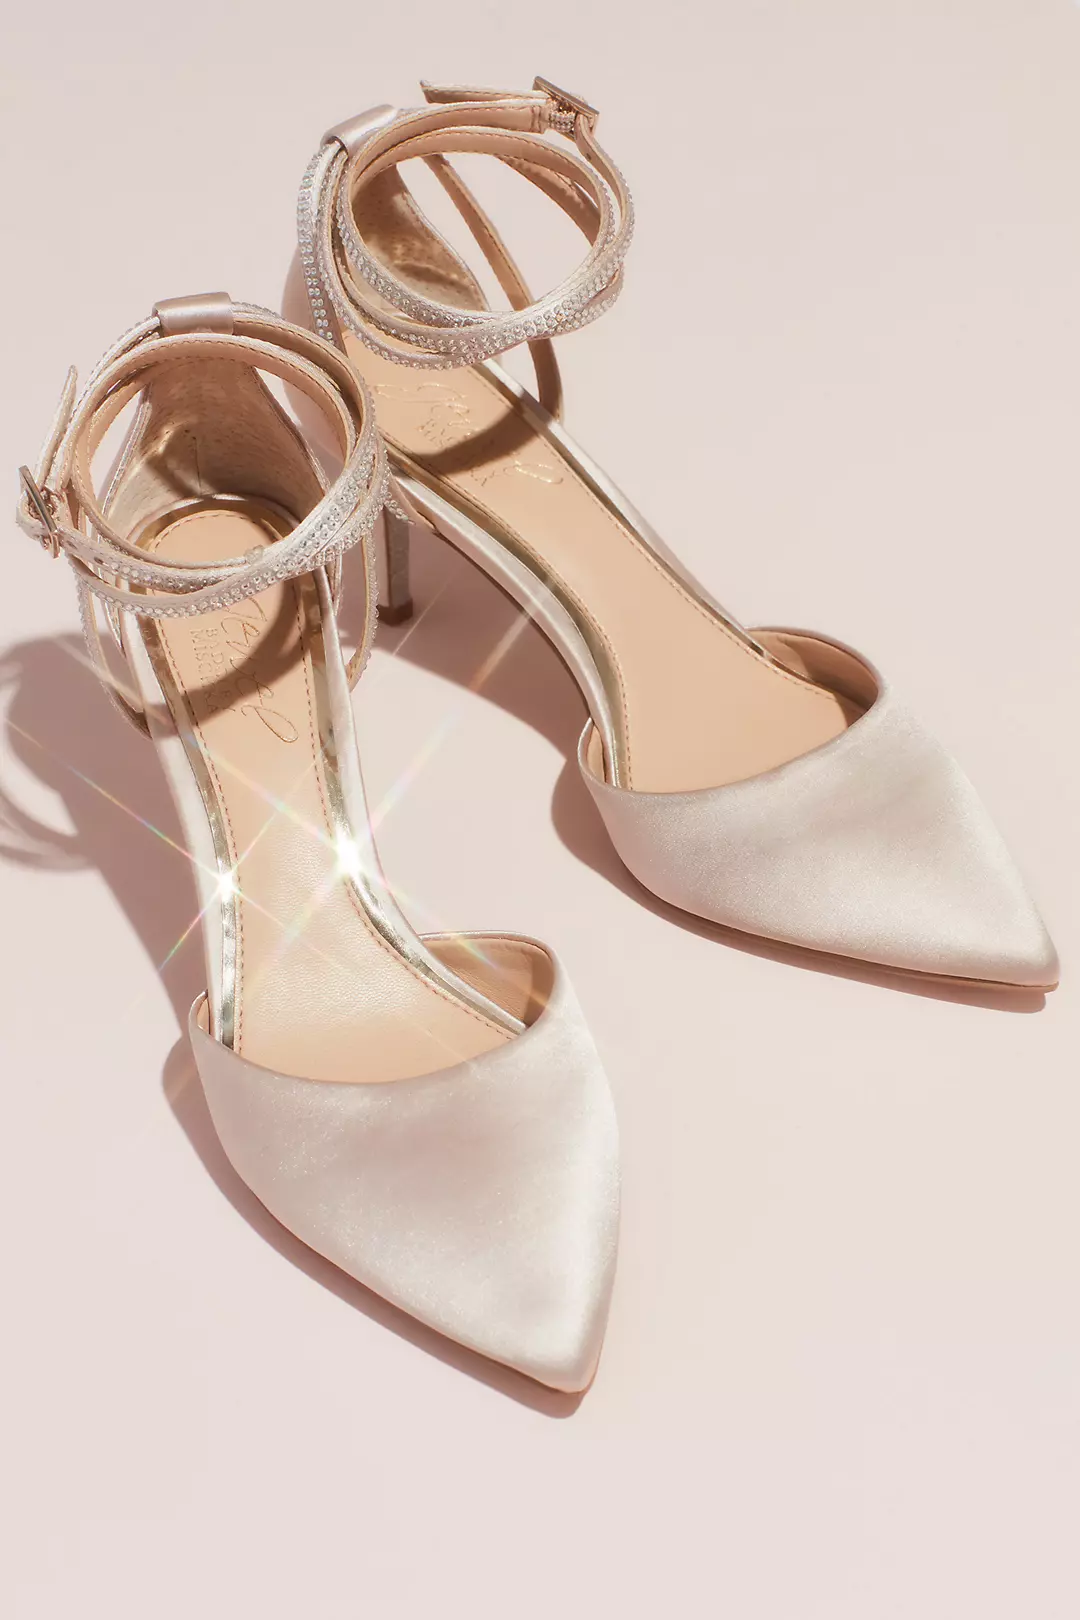 Satin d'Orsay Heels with Crystal Ankle Wrap Strap Image